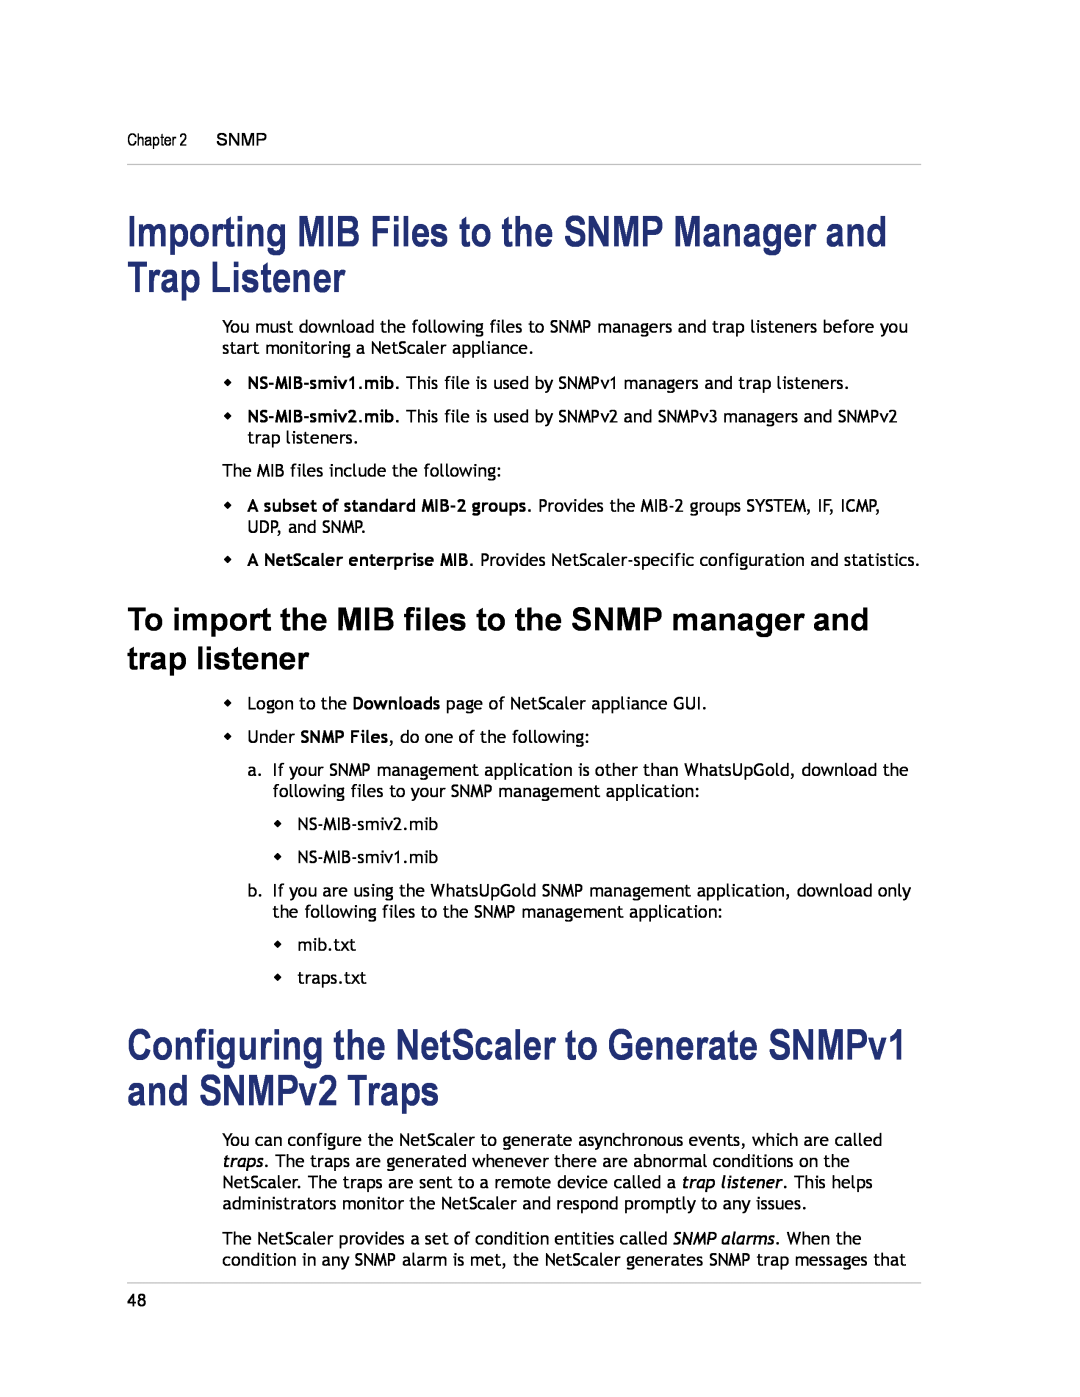 Citrix Systems CITRIX NETSCALER 9.3 manual Importing MIB Files to the SNMP Manager and Trap Listener 